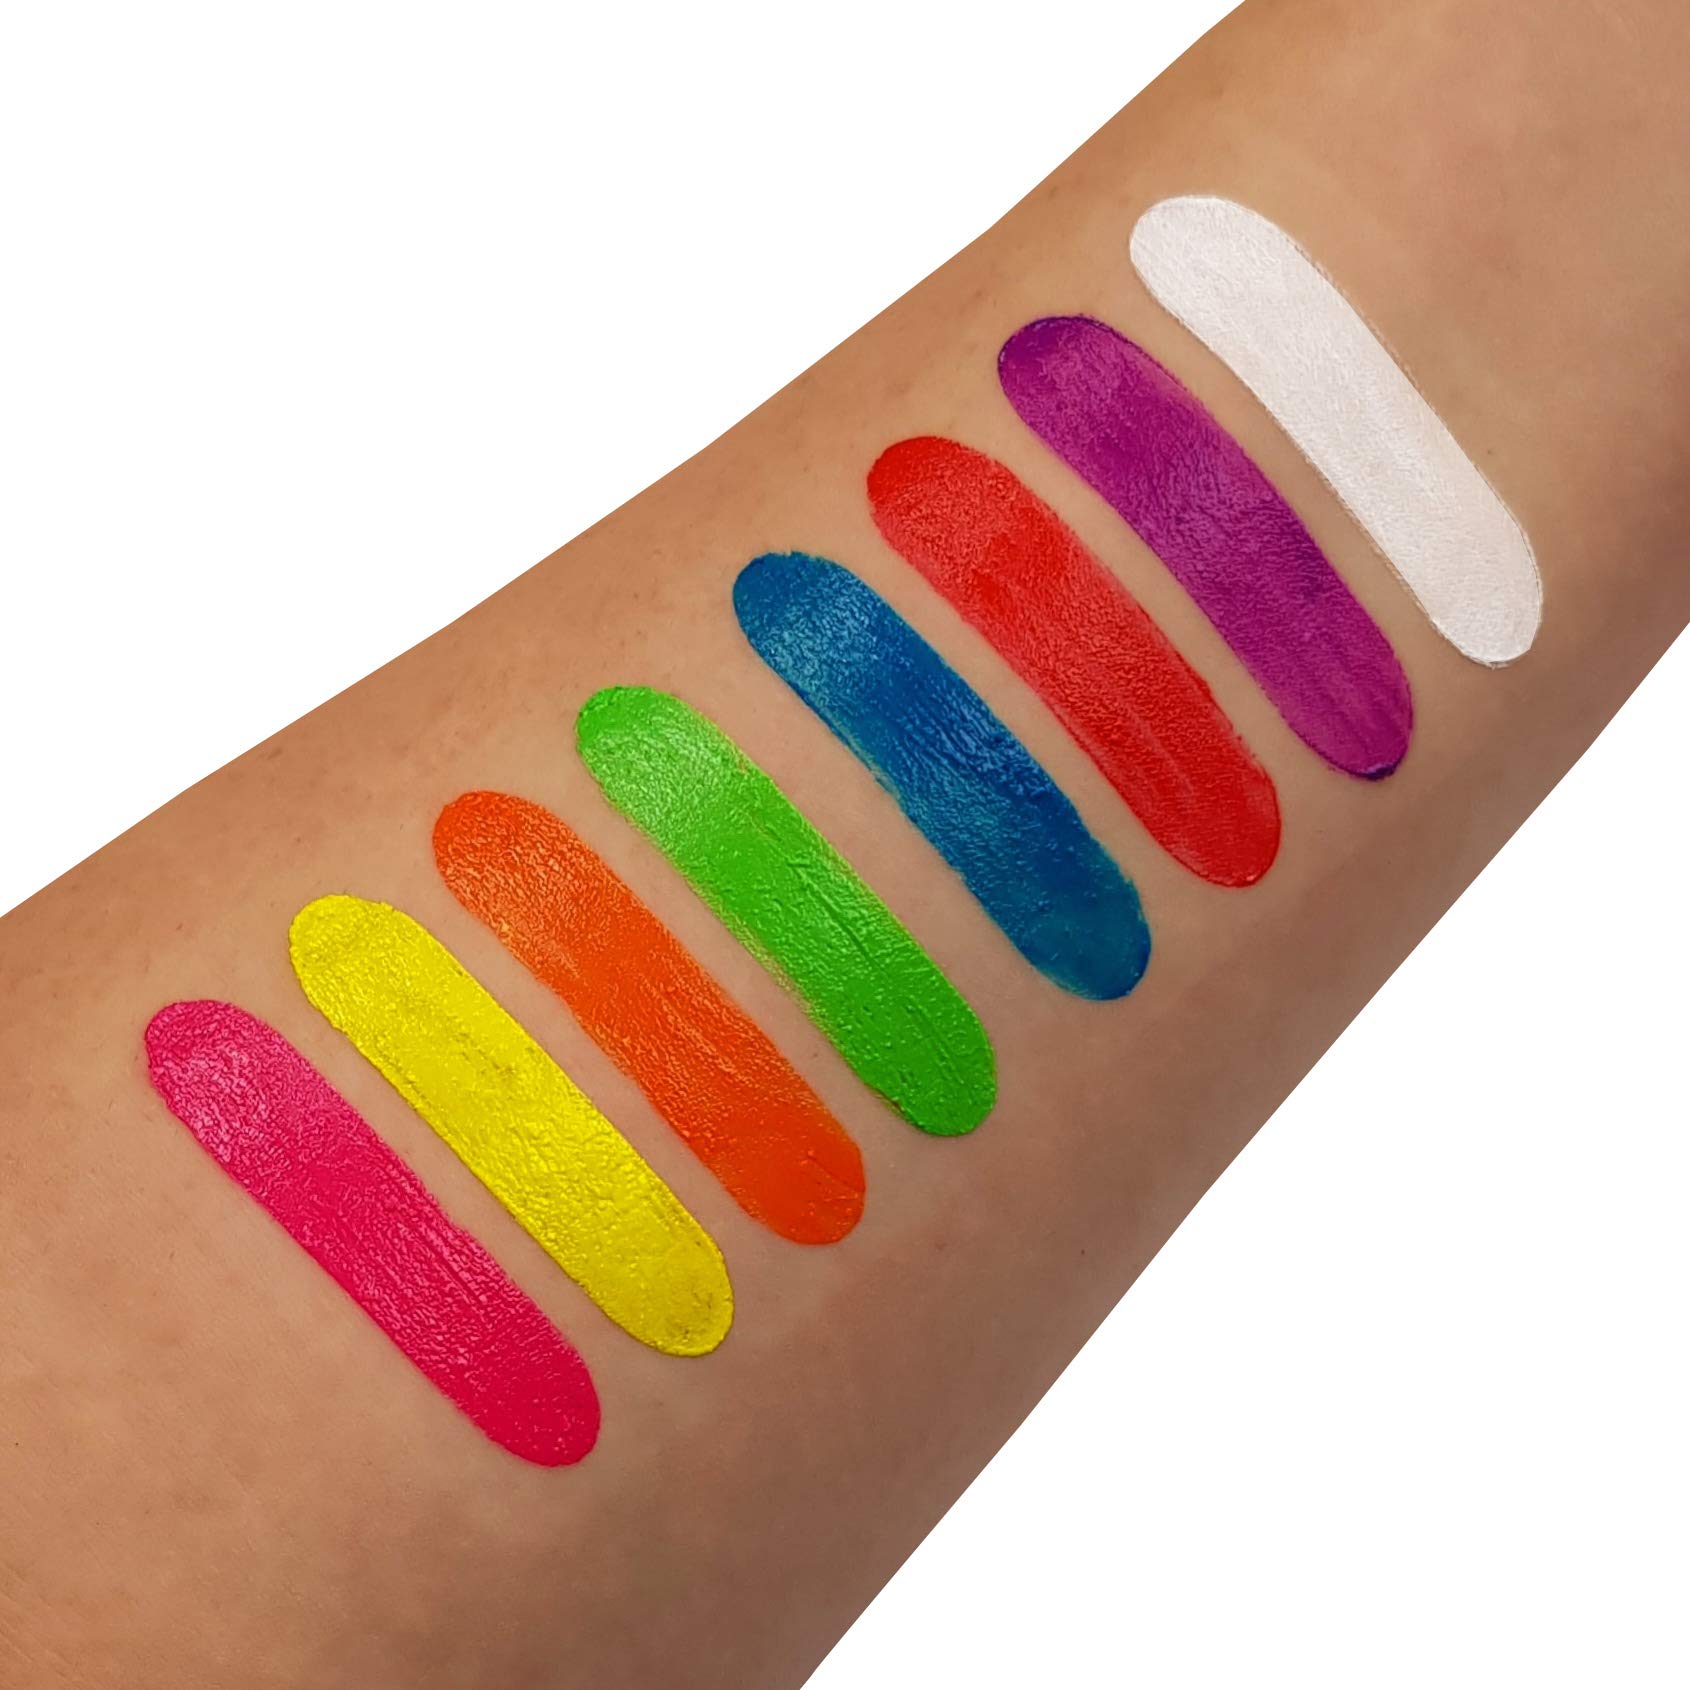 Moon Glow - Blacklight Neon Face Paint Stick/Body Crayon makeup for the Face & Body - Pastel & Intense set of 16 colours - Glows brightly under blacklights